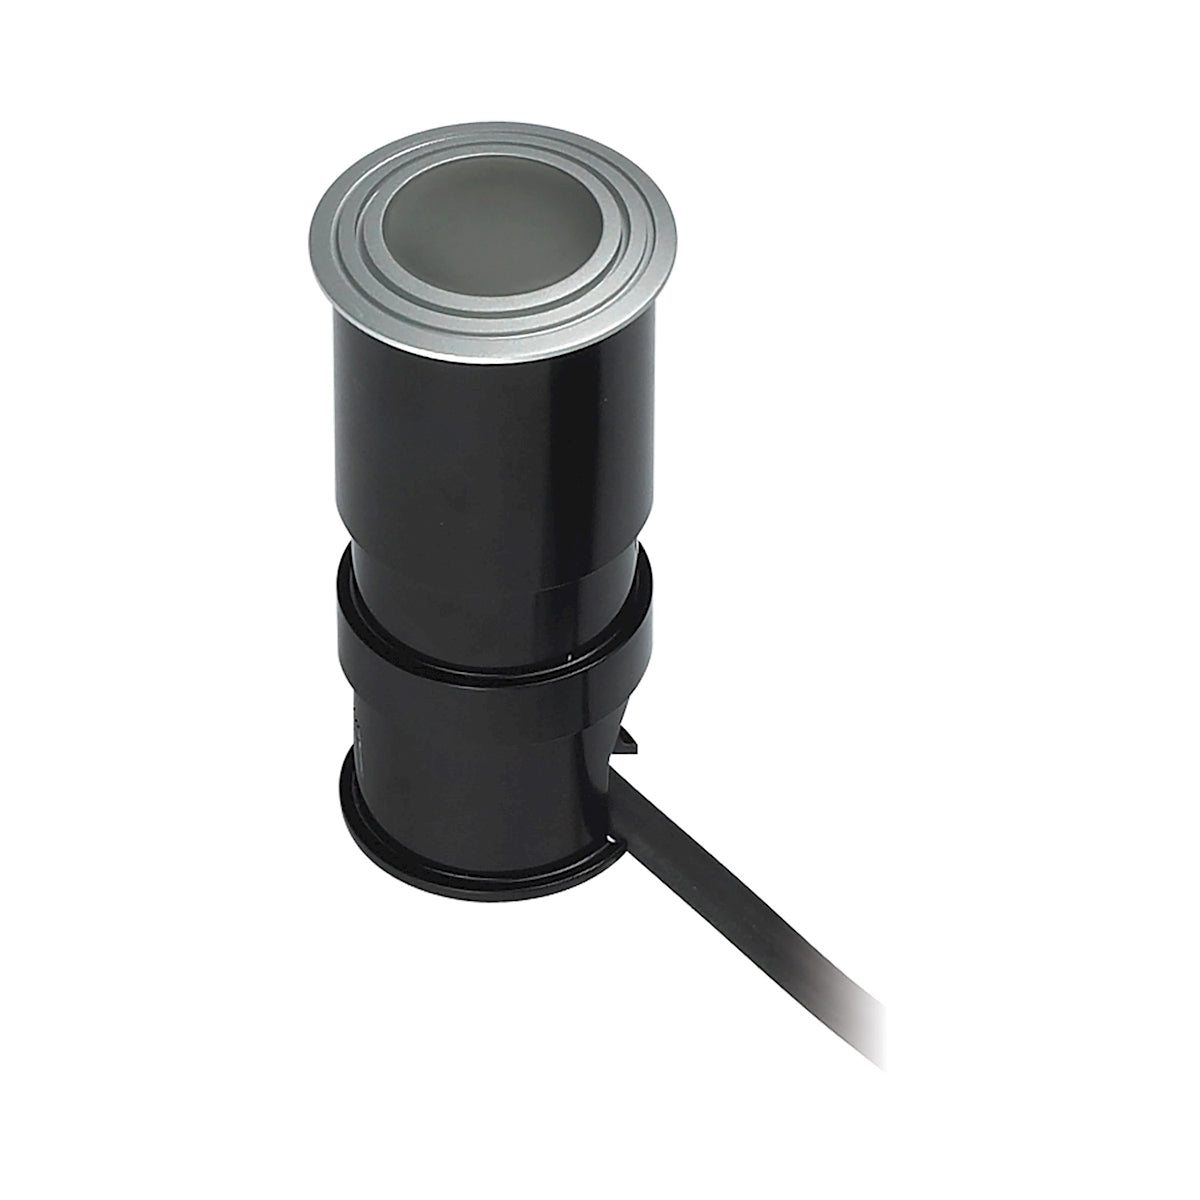 ELK Lighting WLE125C32K-5-95 Wet Spot 1-Light Button Light in Metallic Grey with Frosted Glass Lens - Integrated LED